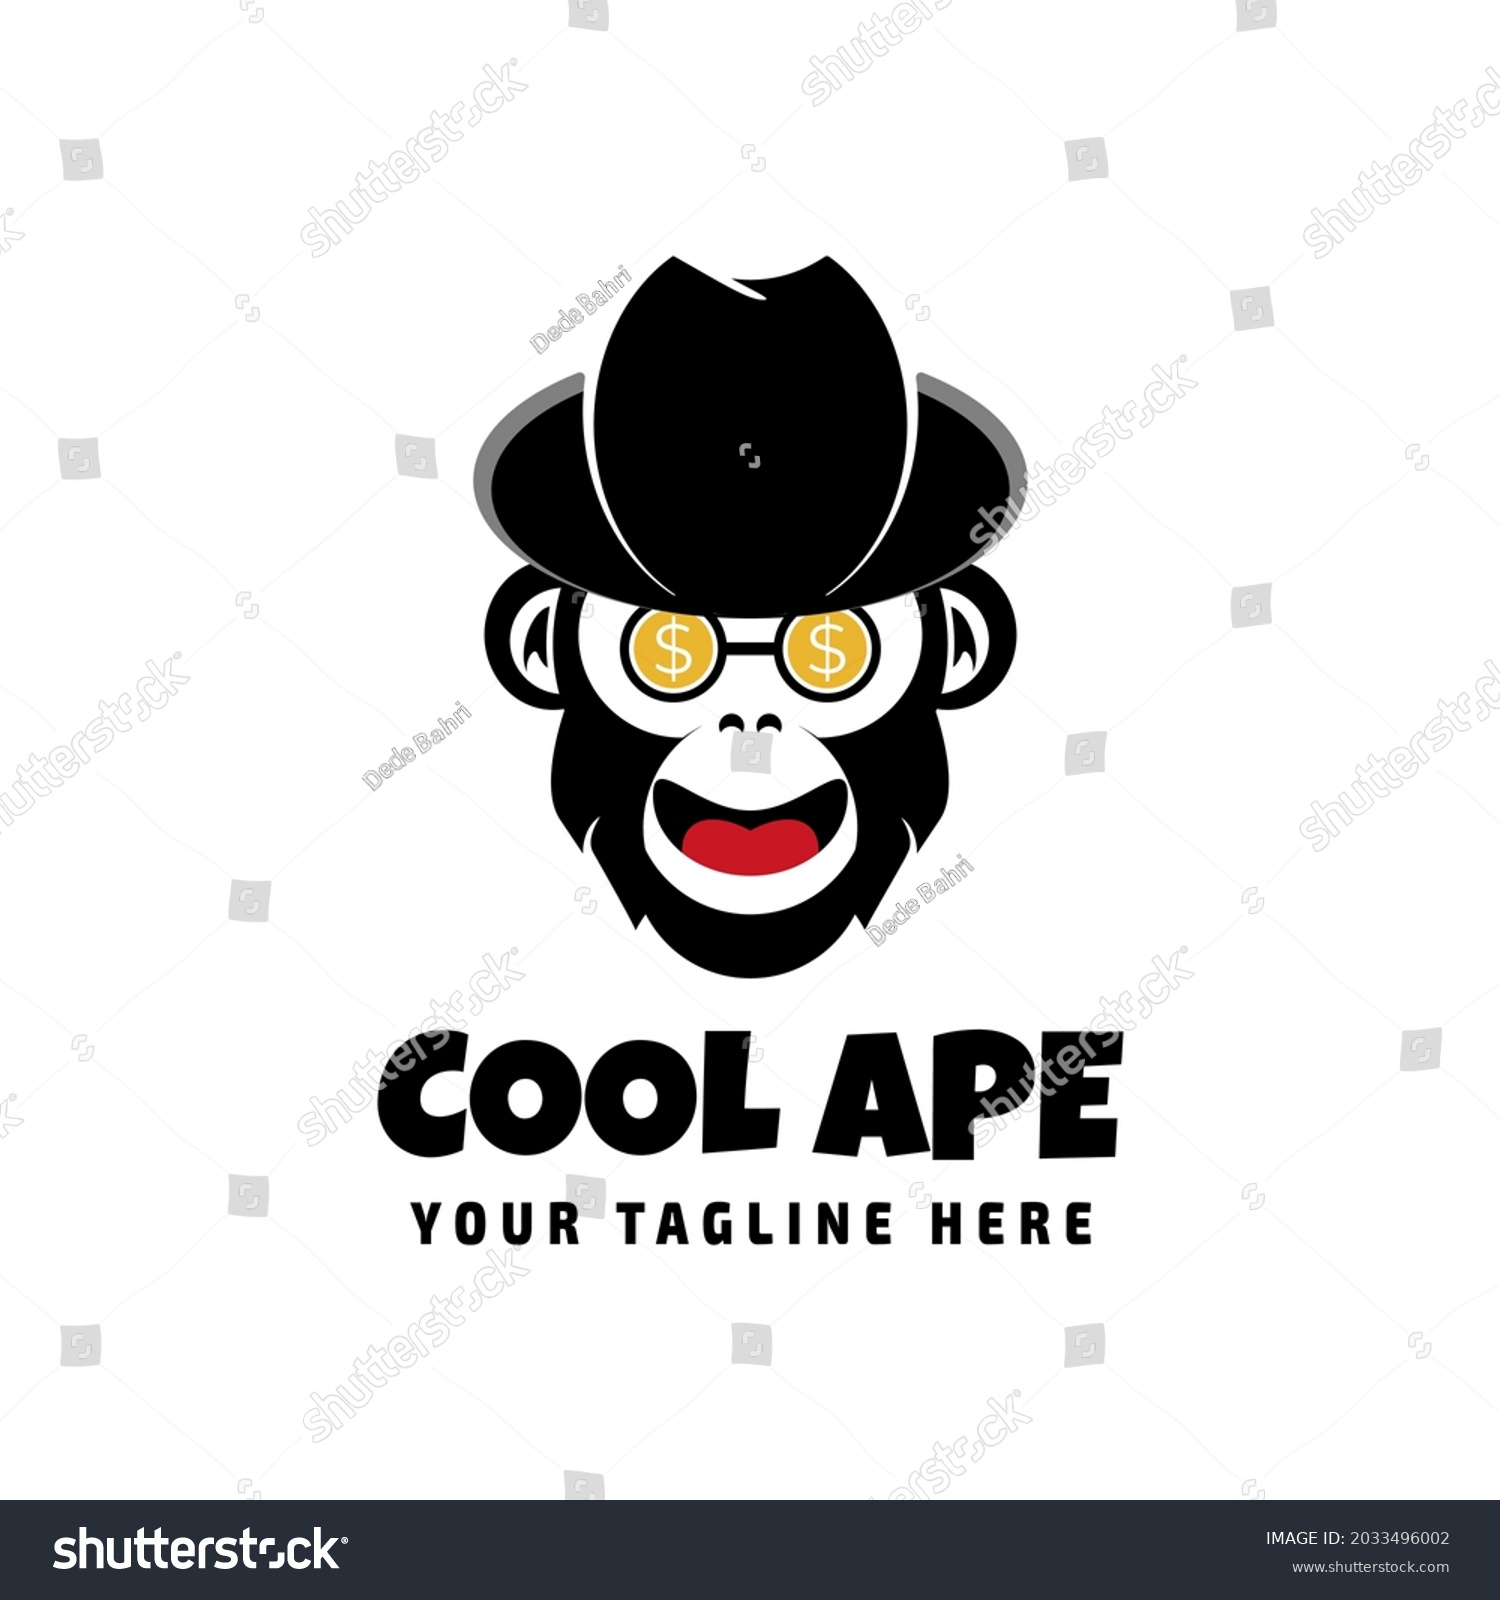 SVG of cool ape logo using cowboy hat and dollar coin shaped glasses. in illustration format eps.10 svg